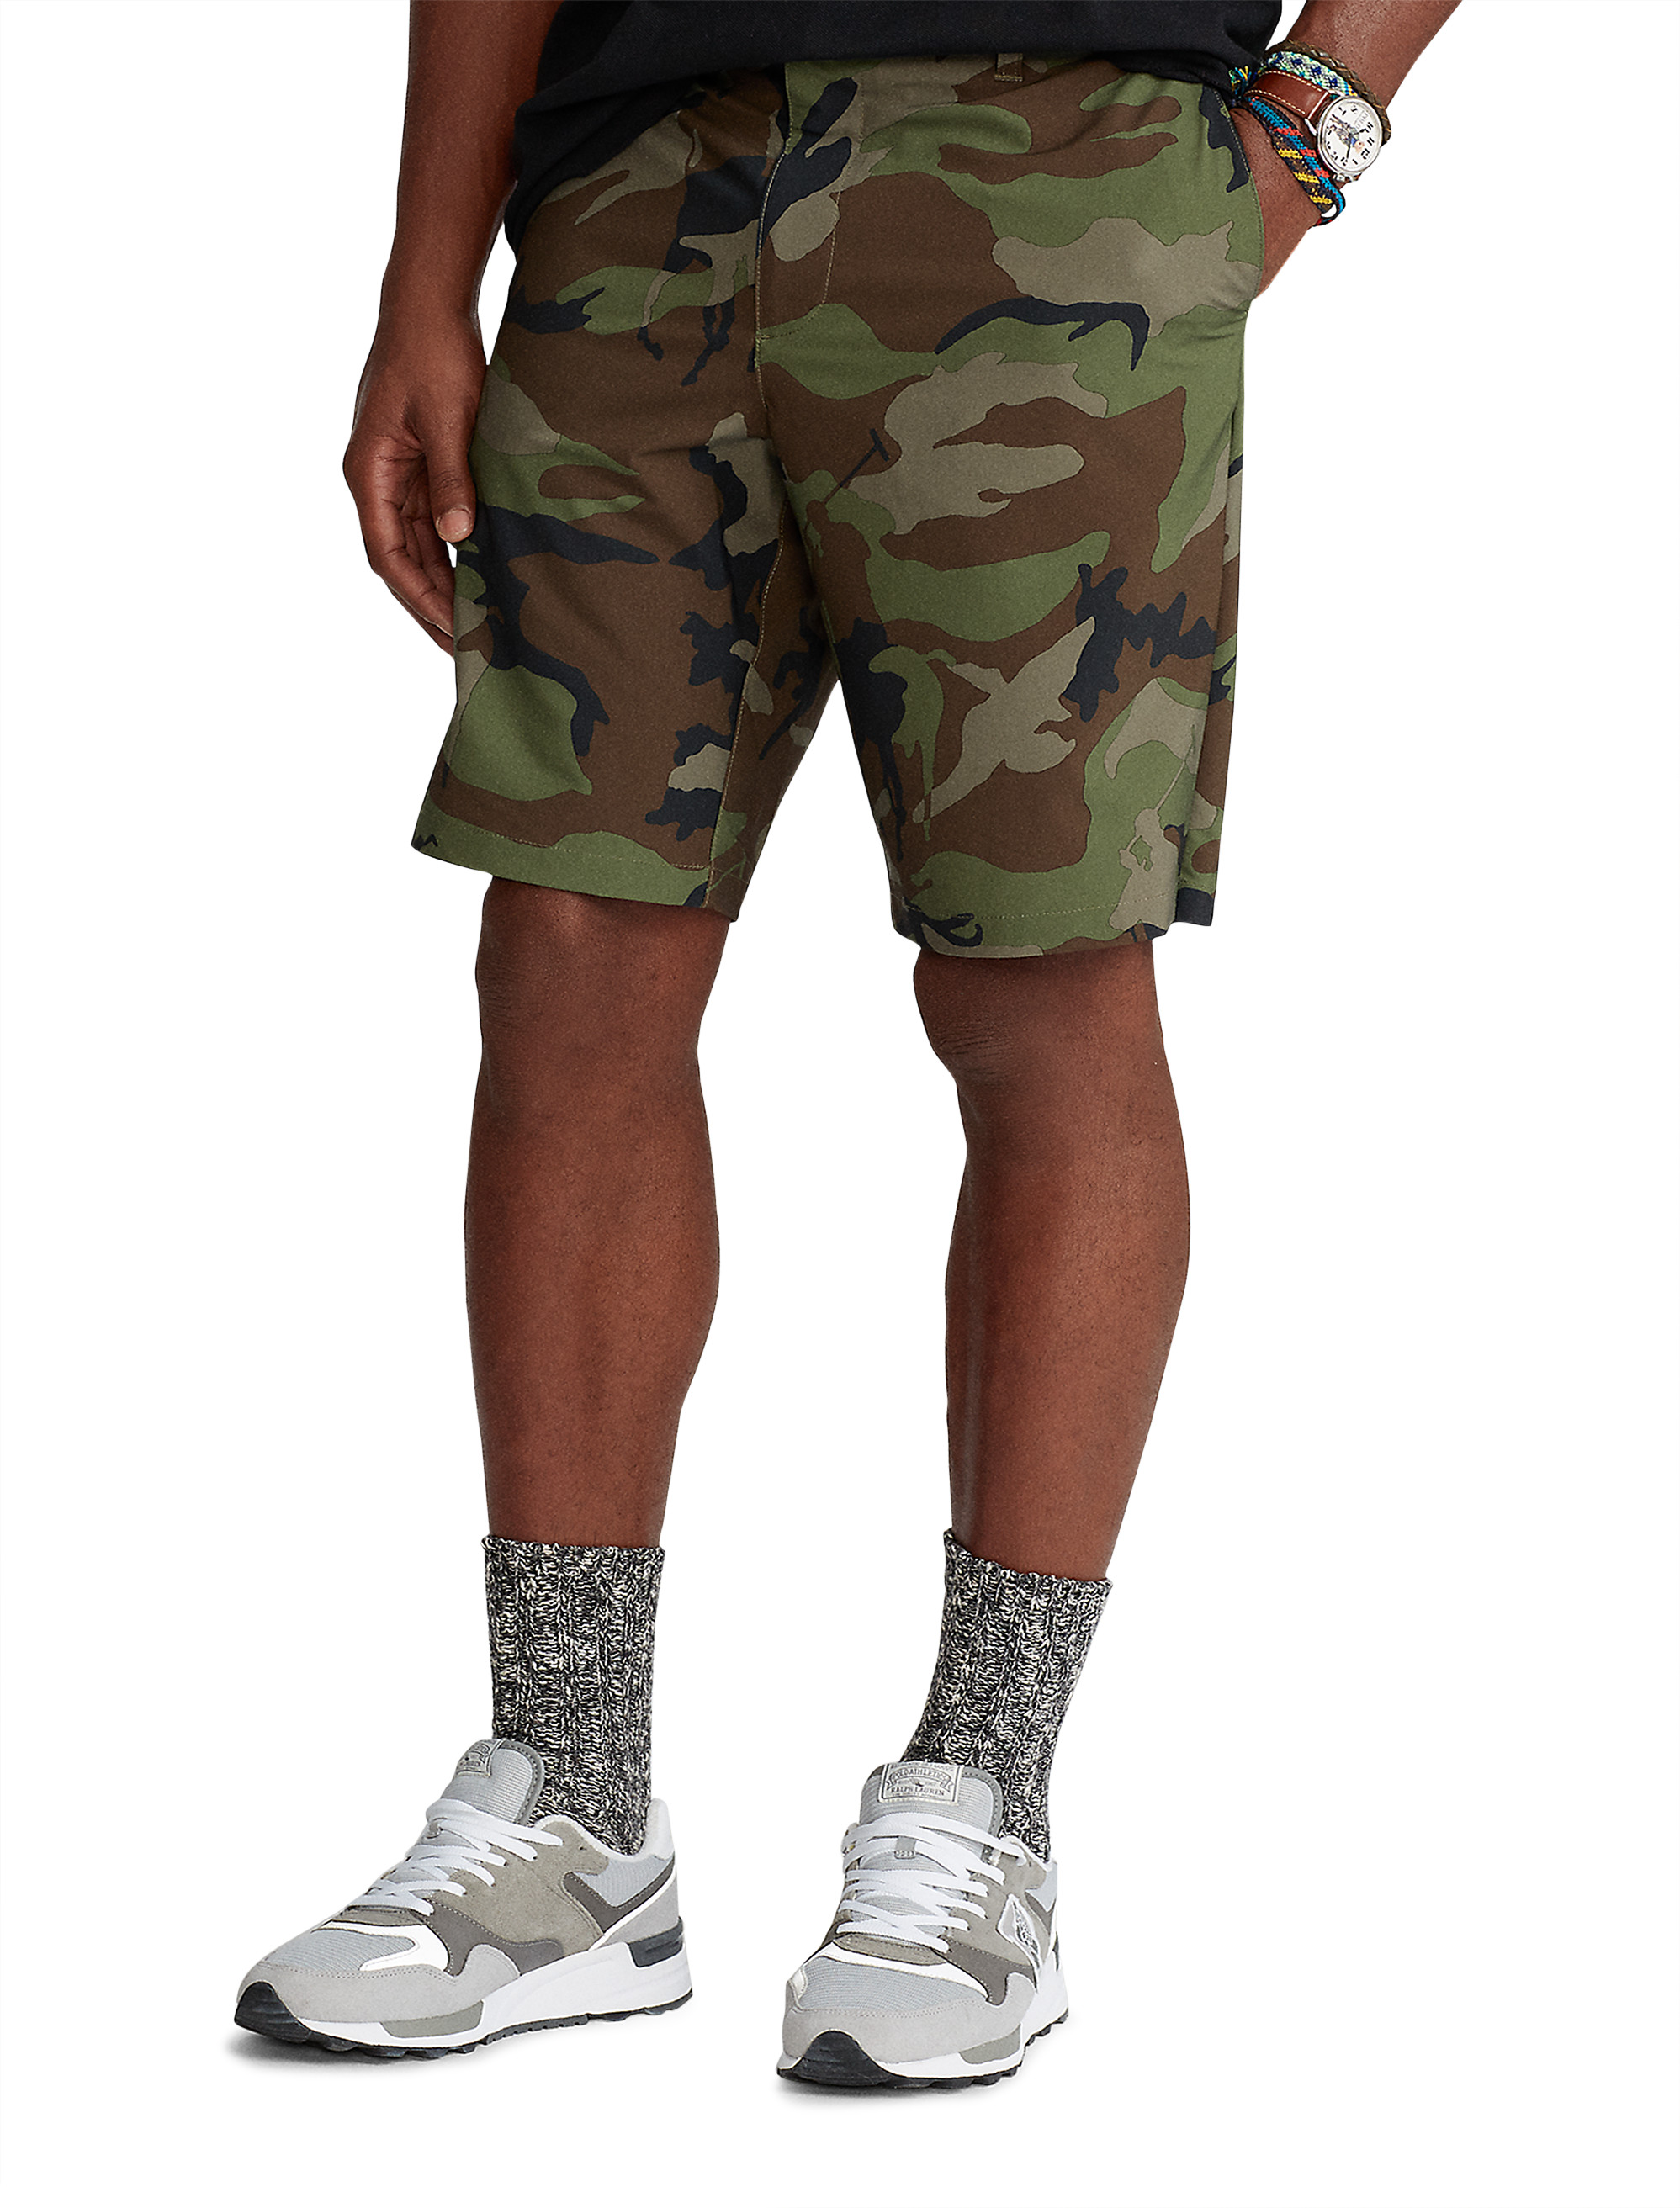 Big and Tall | Polo Ralph Lauren Camo All-Day Beach Shorts | Men's Clothing